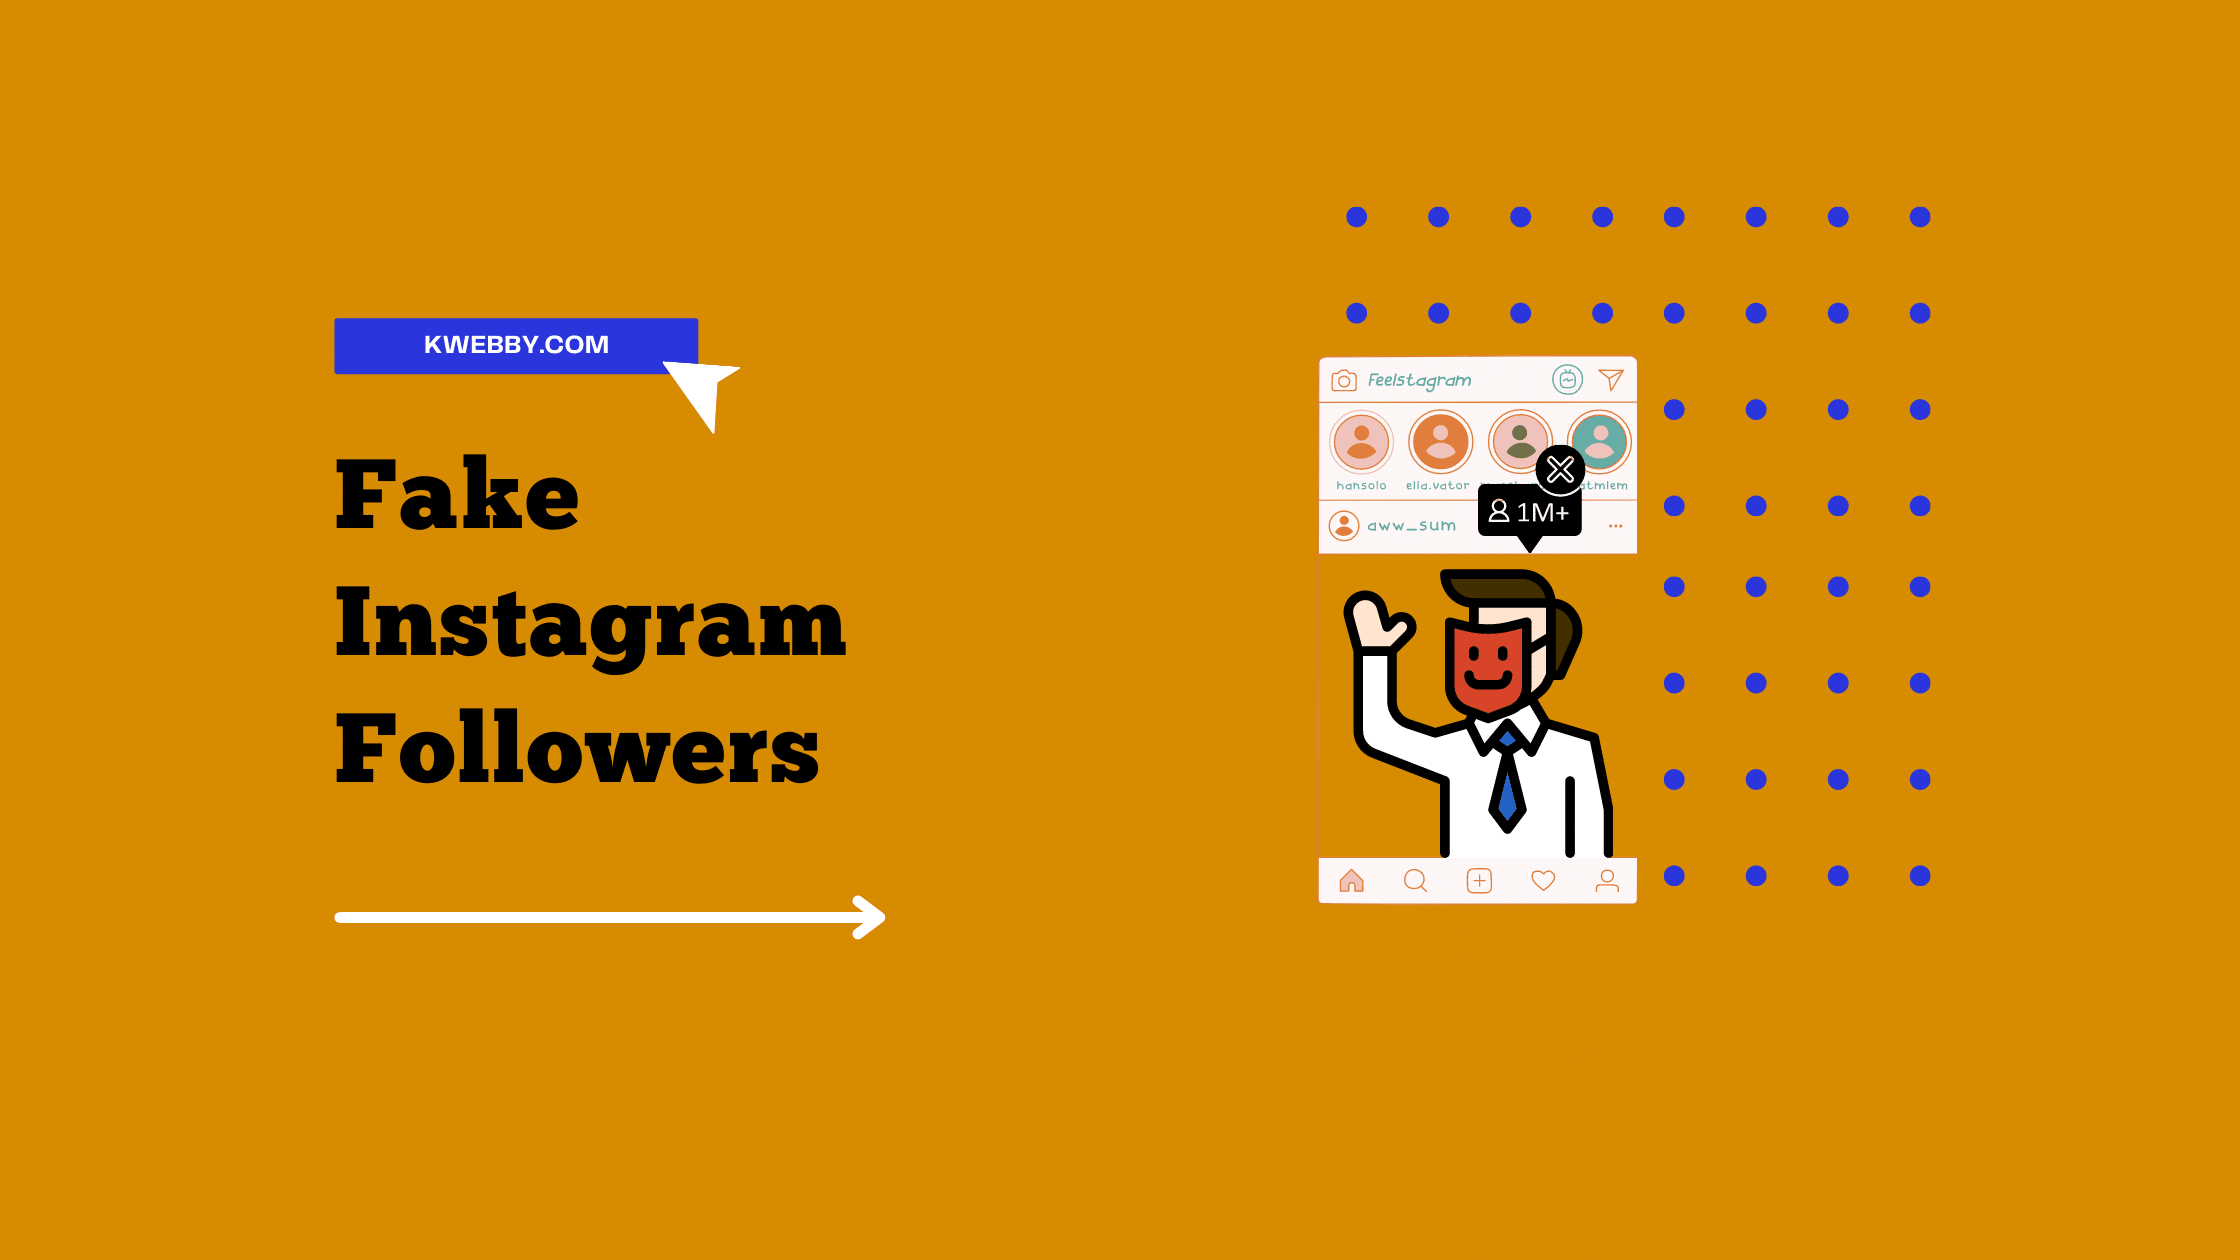 How To Spot Fake Instagram Followers In 5 Easy Steps